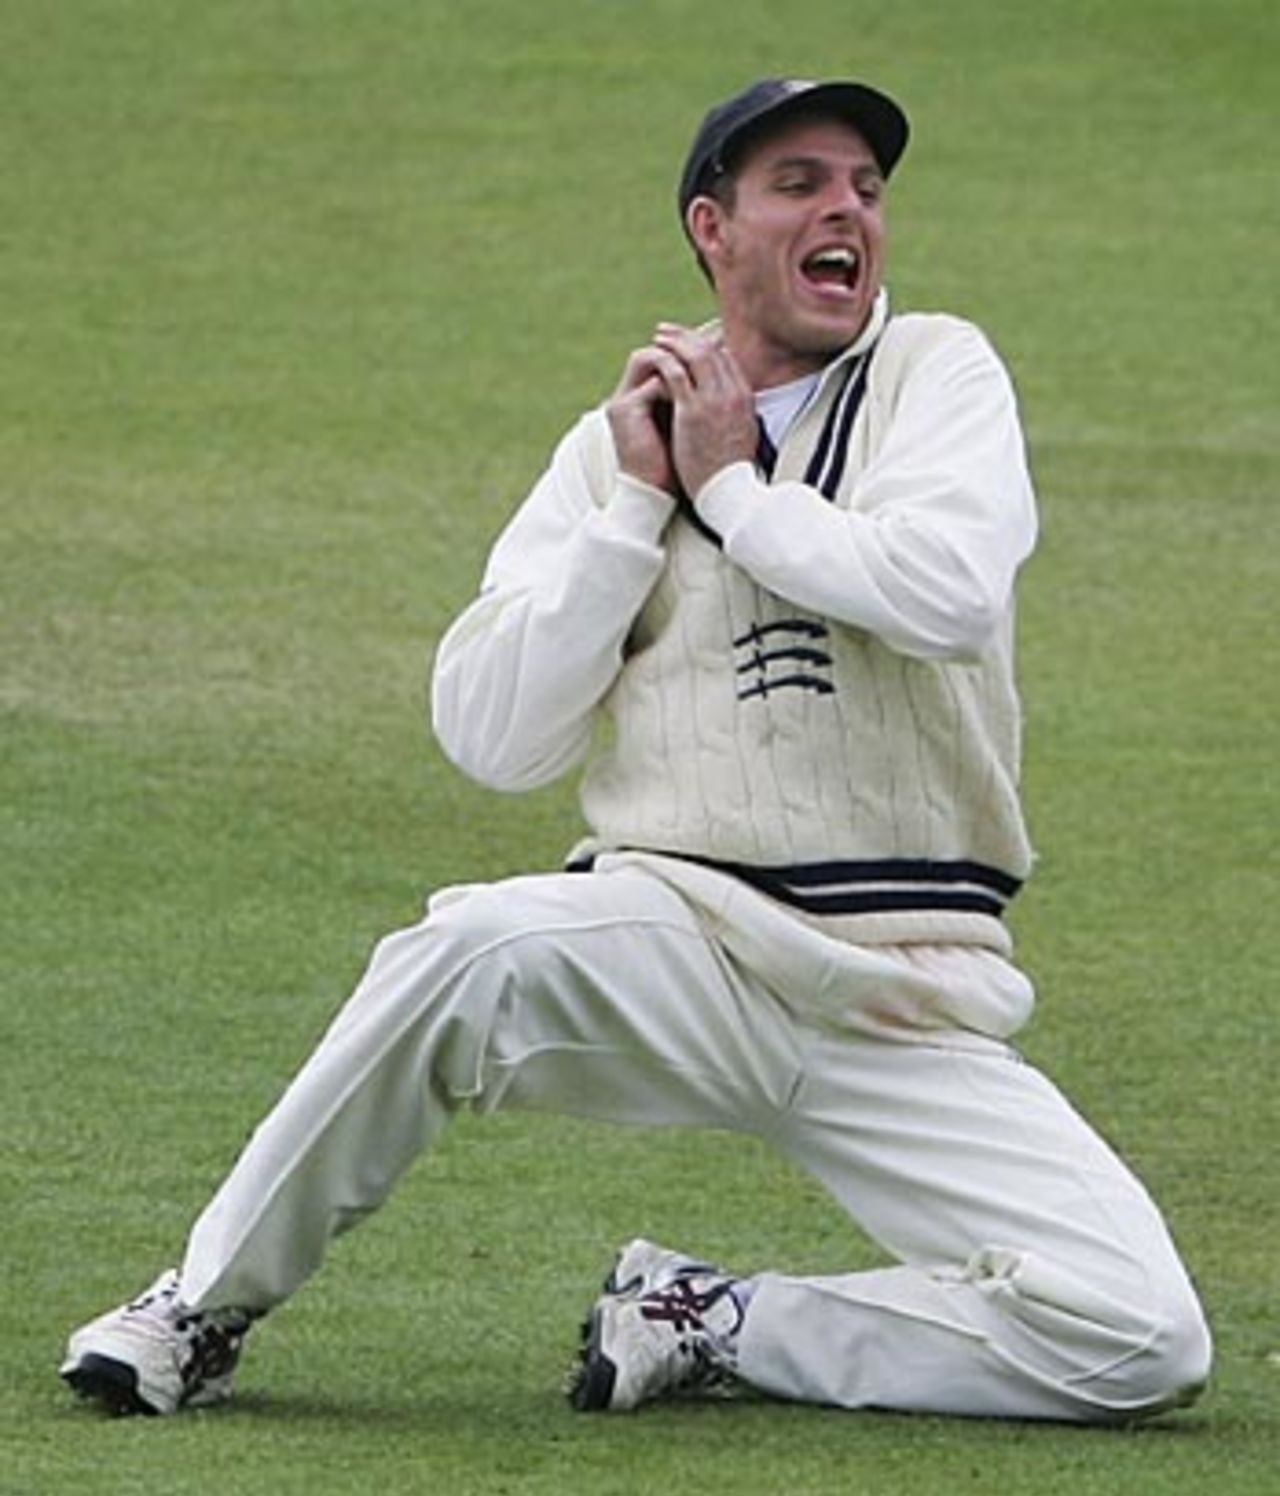 Ben Hutton takes the catch to dismiss Min Patel , Middlesex v Kent, County Championship, Lord's, April 27, 2006